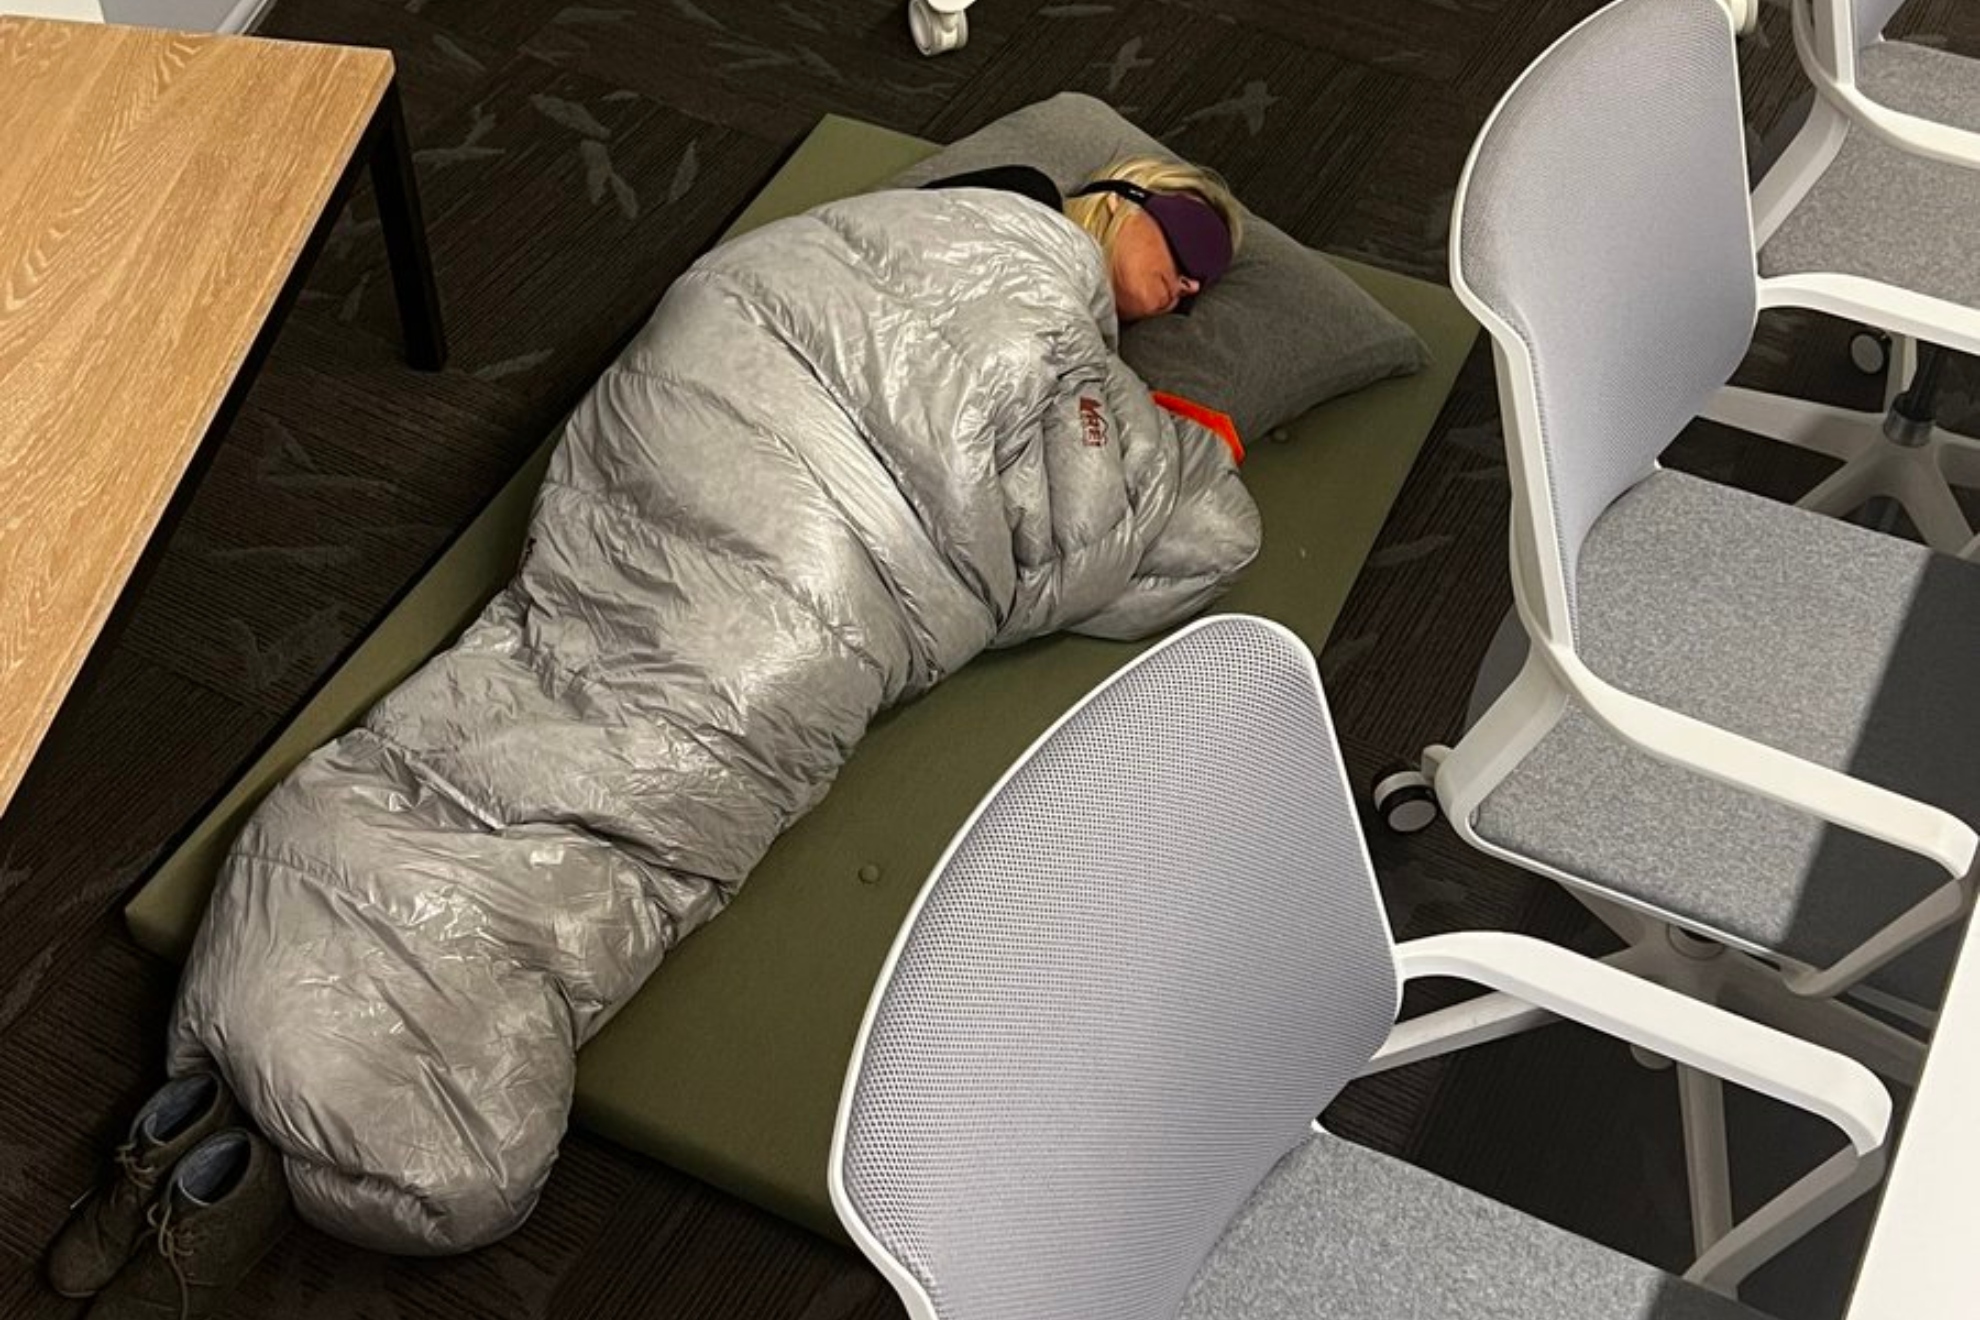 Musk's impact: Image of Twitter worker sleeping in the office goes viral